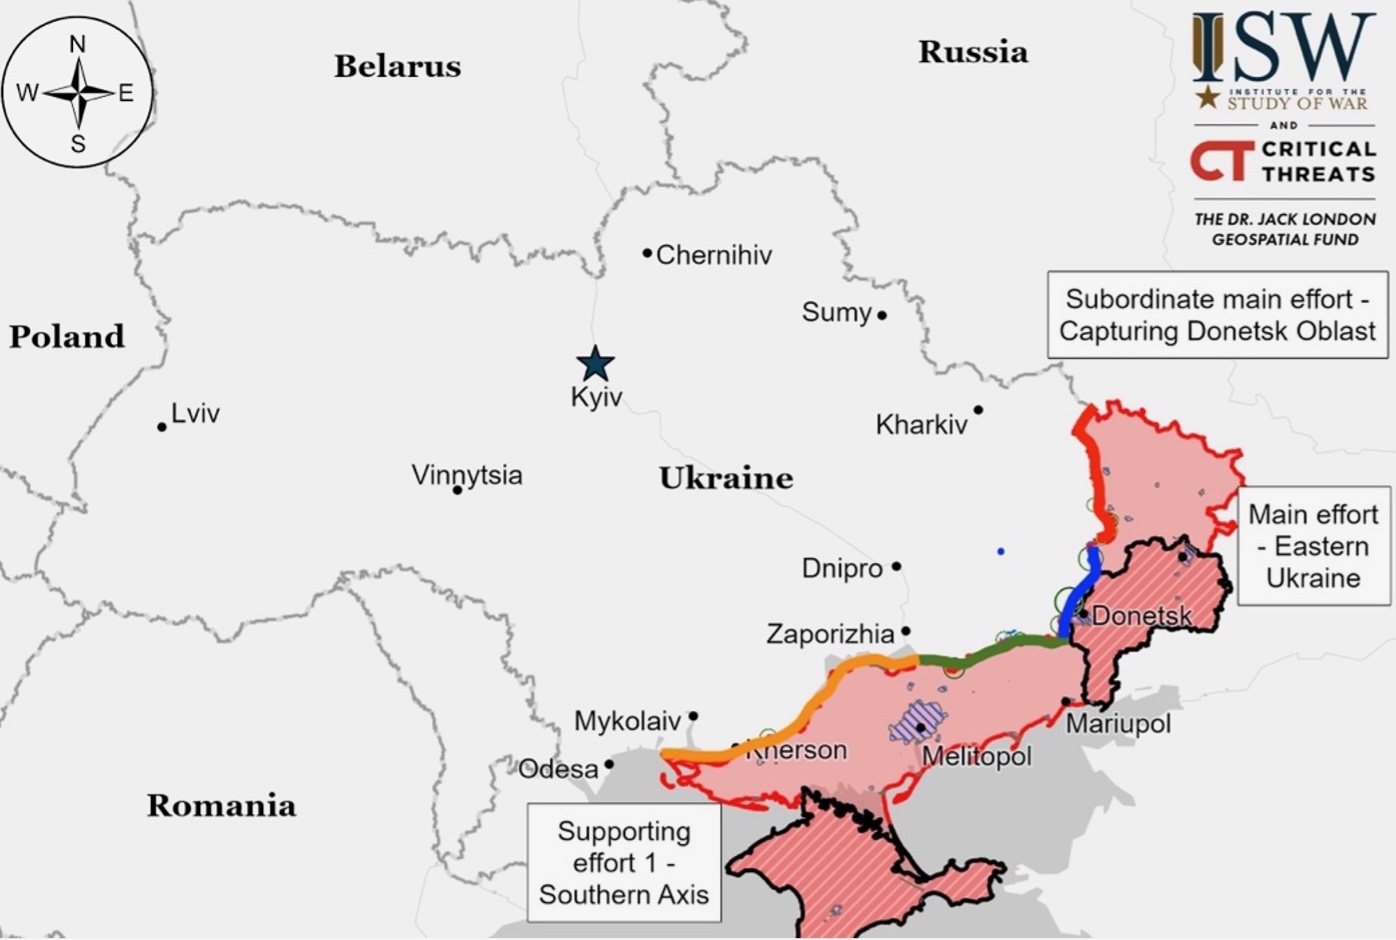 A map of ukraine with red and blue areas

Description automatically generated